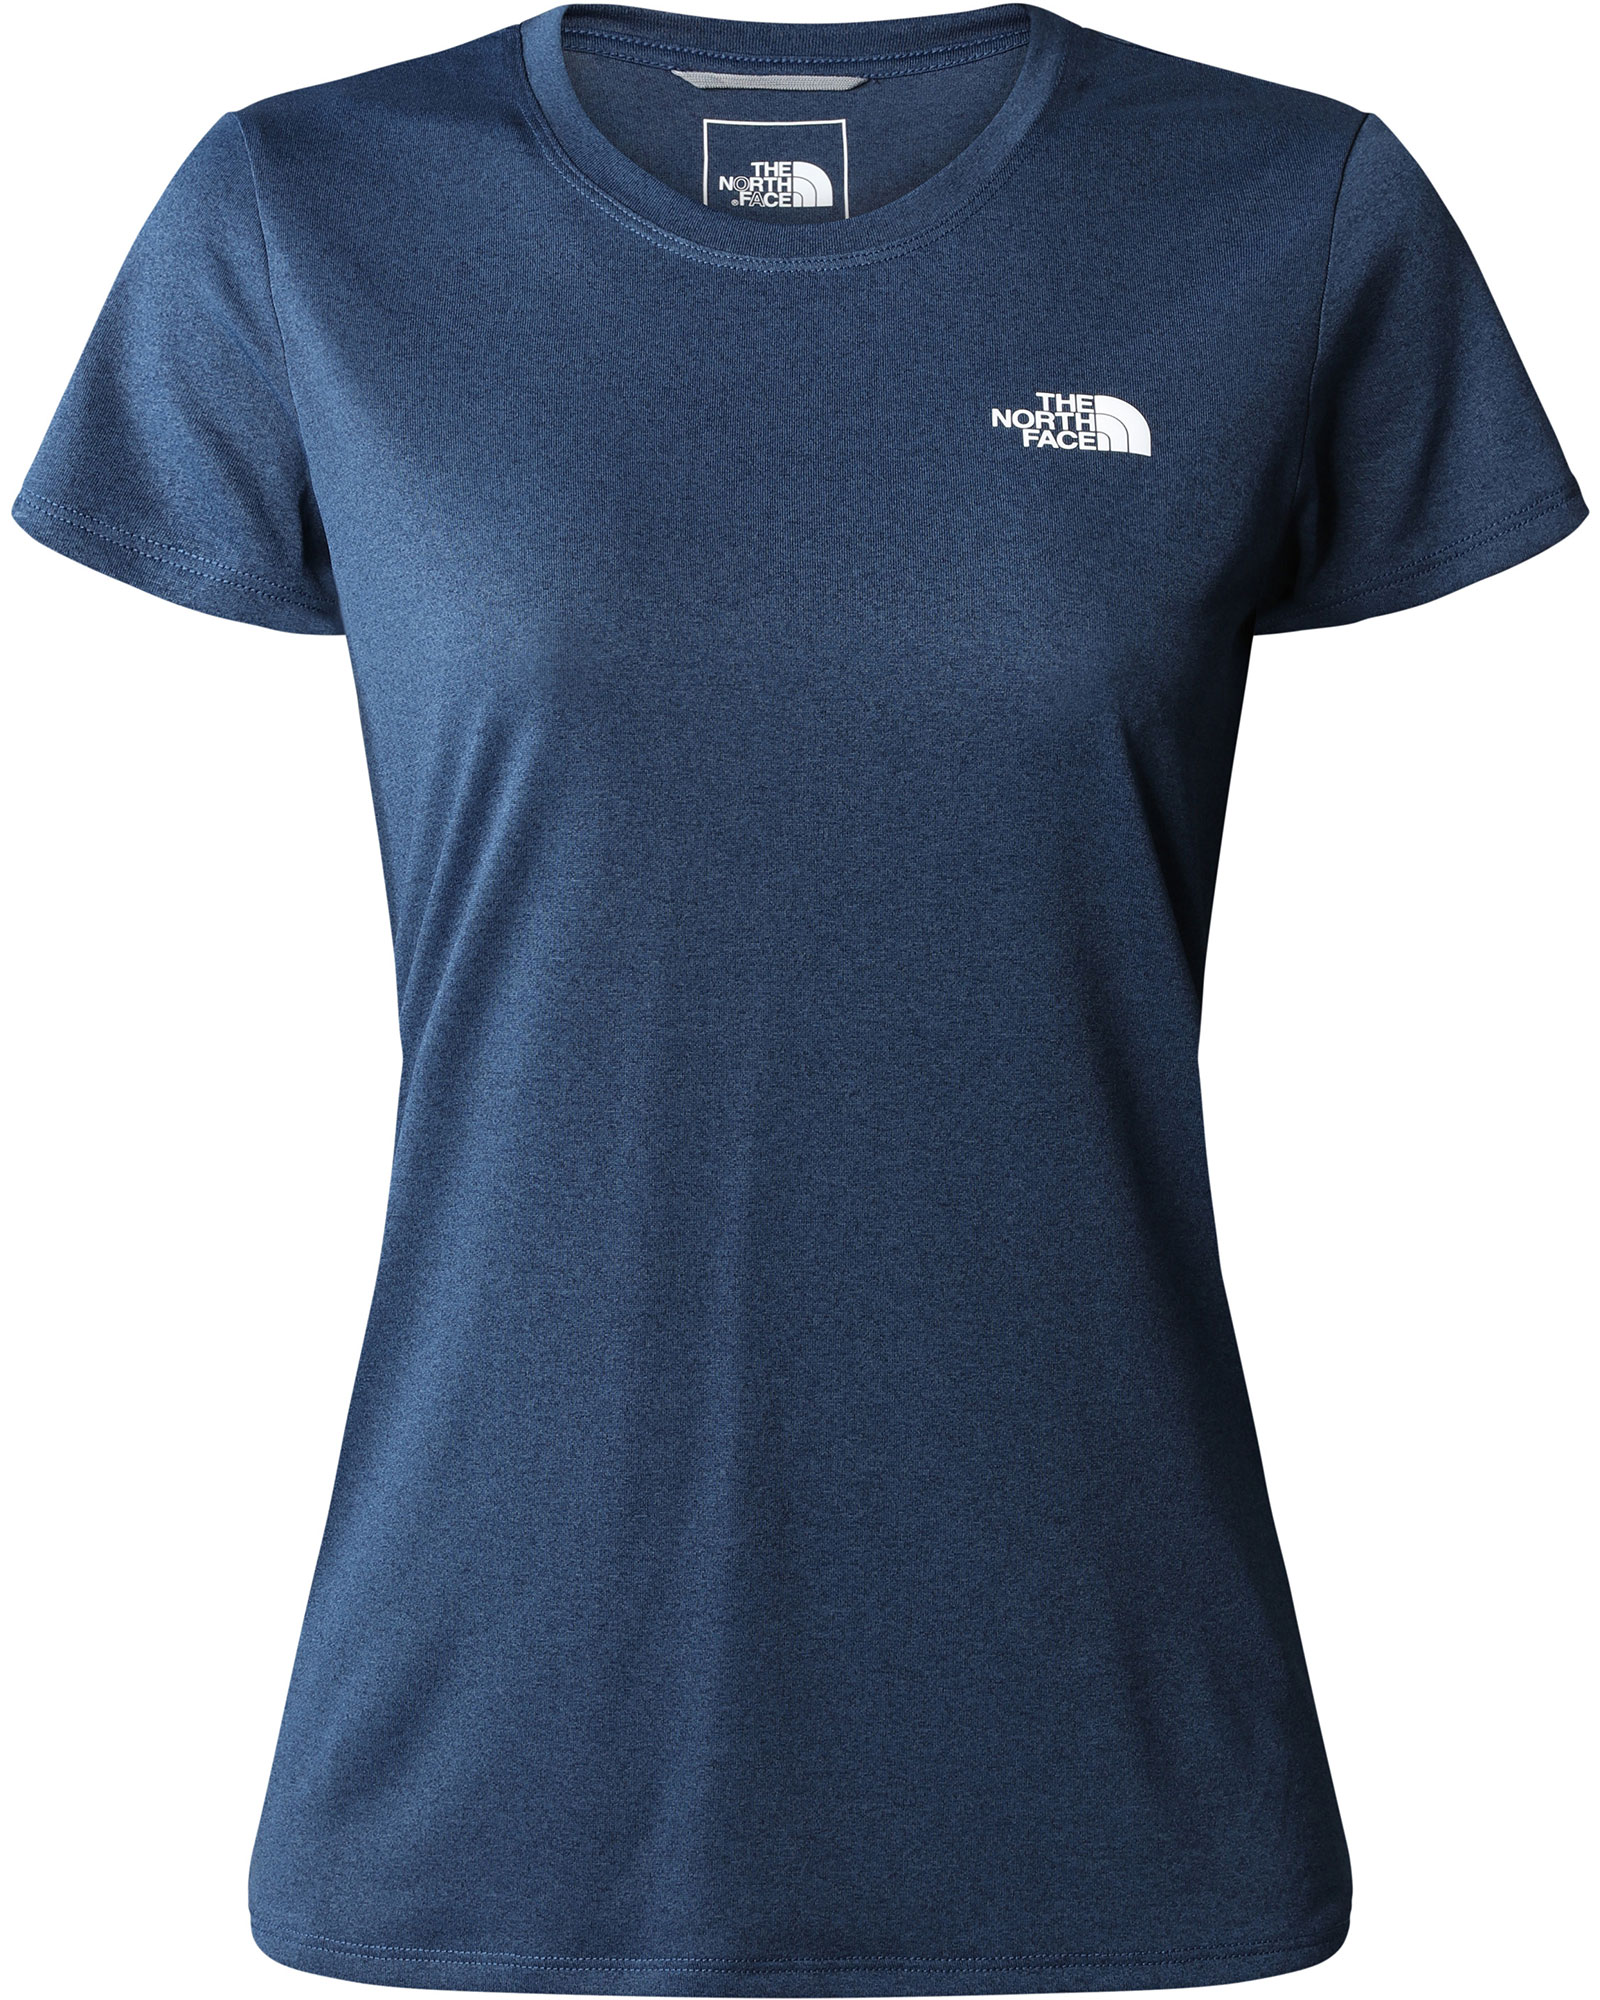 The North Face Reaxion Amp Women's Crew T-Shirt 0